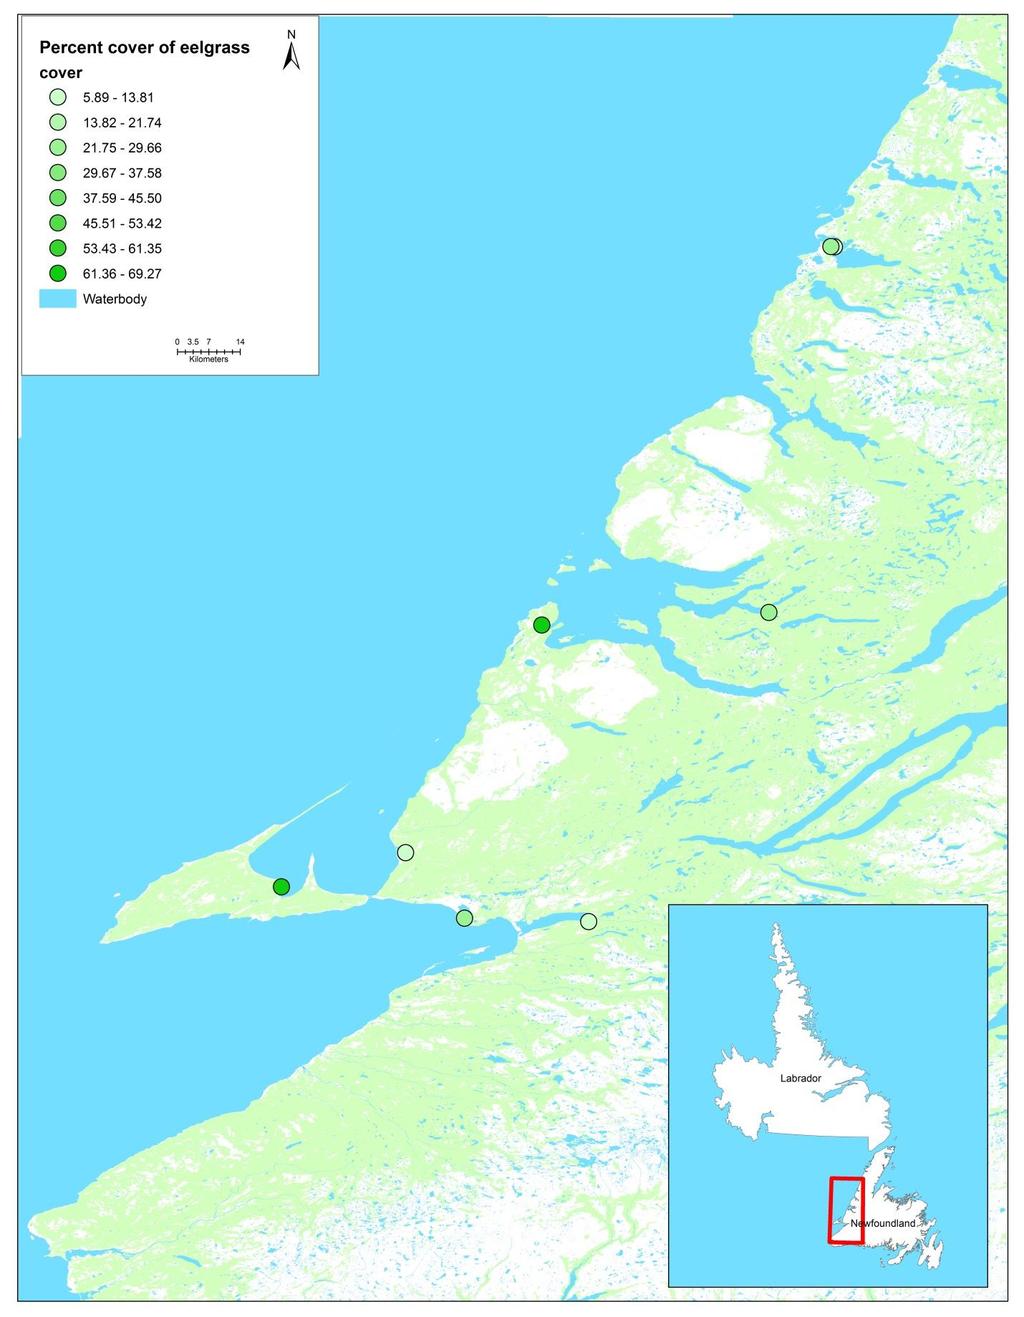 Figure 1: Geographic location and relative percent cover of eelgrass